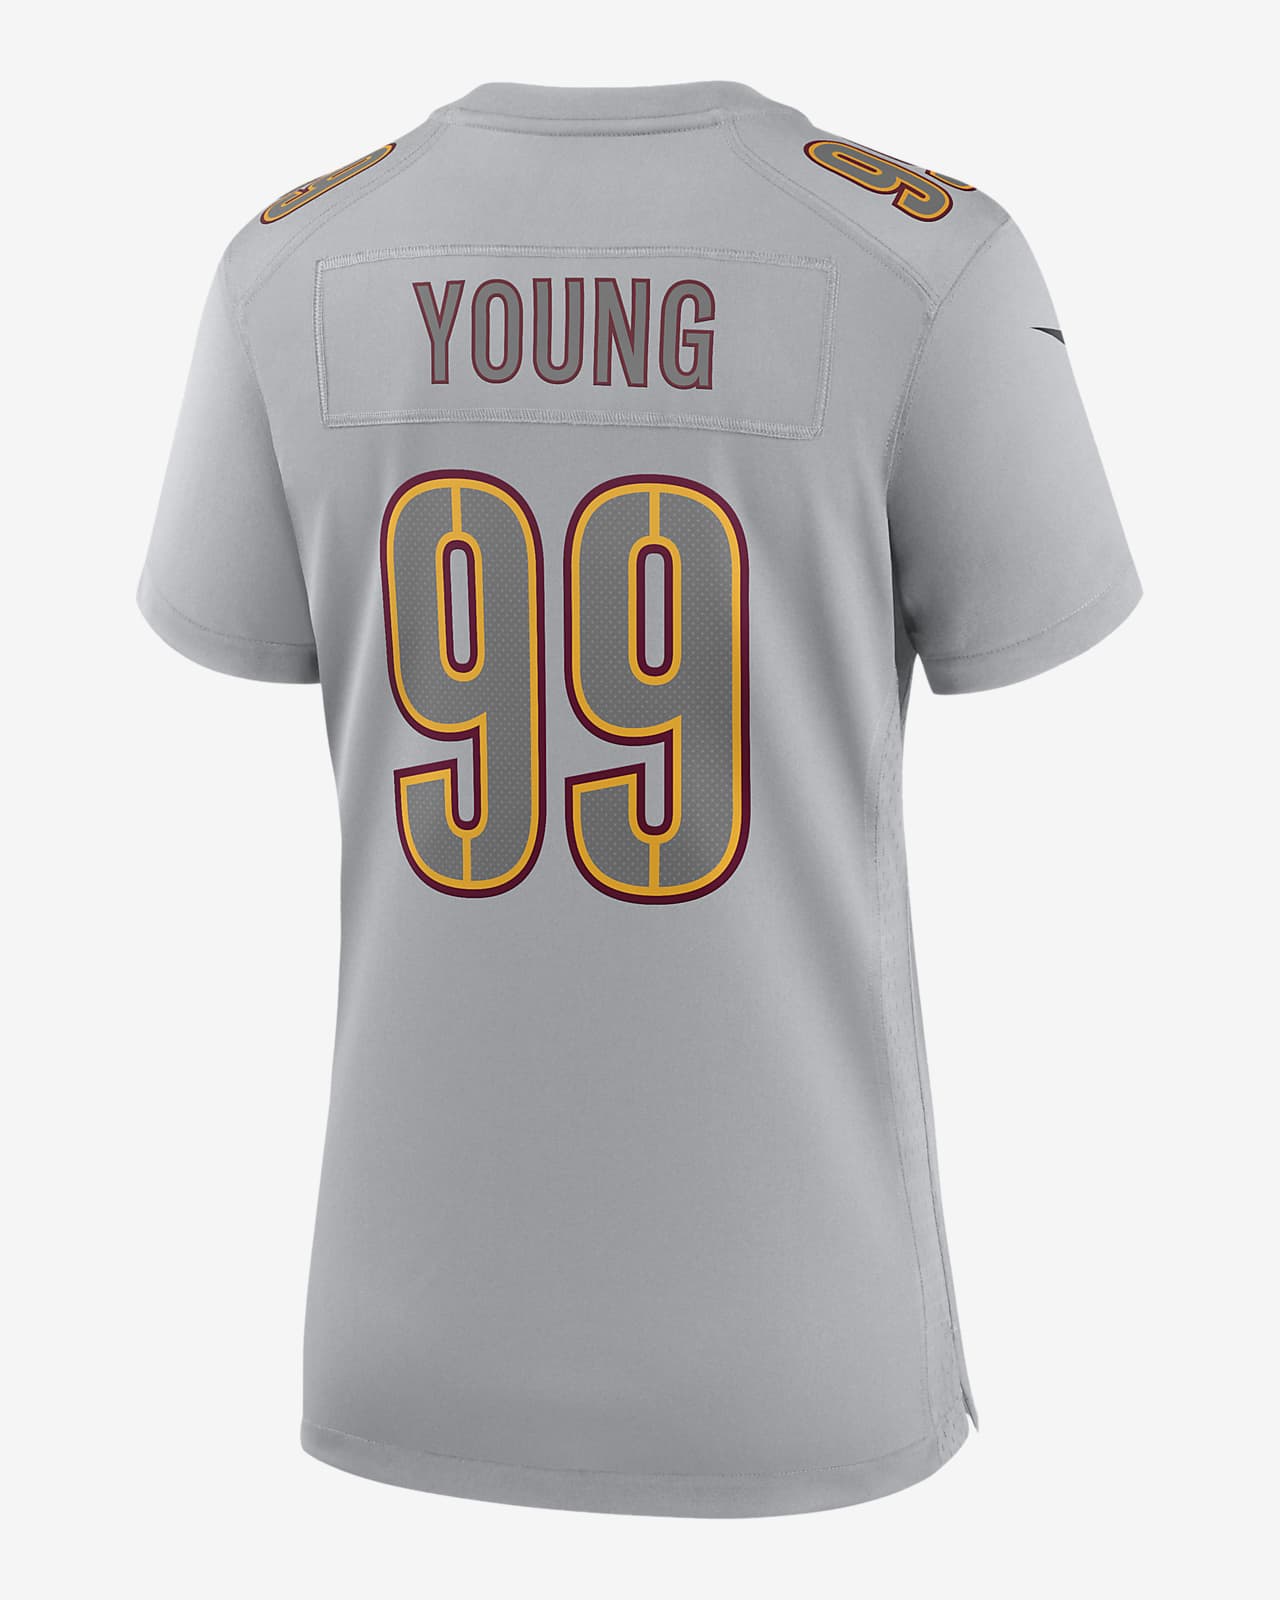 NFL Washington Commanders Atmosphere (Chase Young) Women's Fashion Football  Jersey.